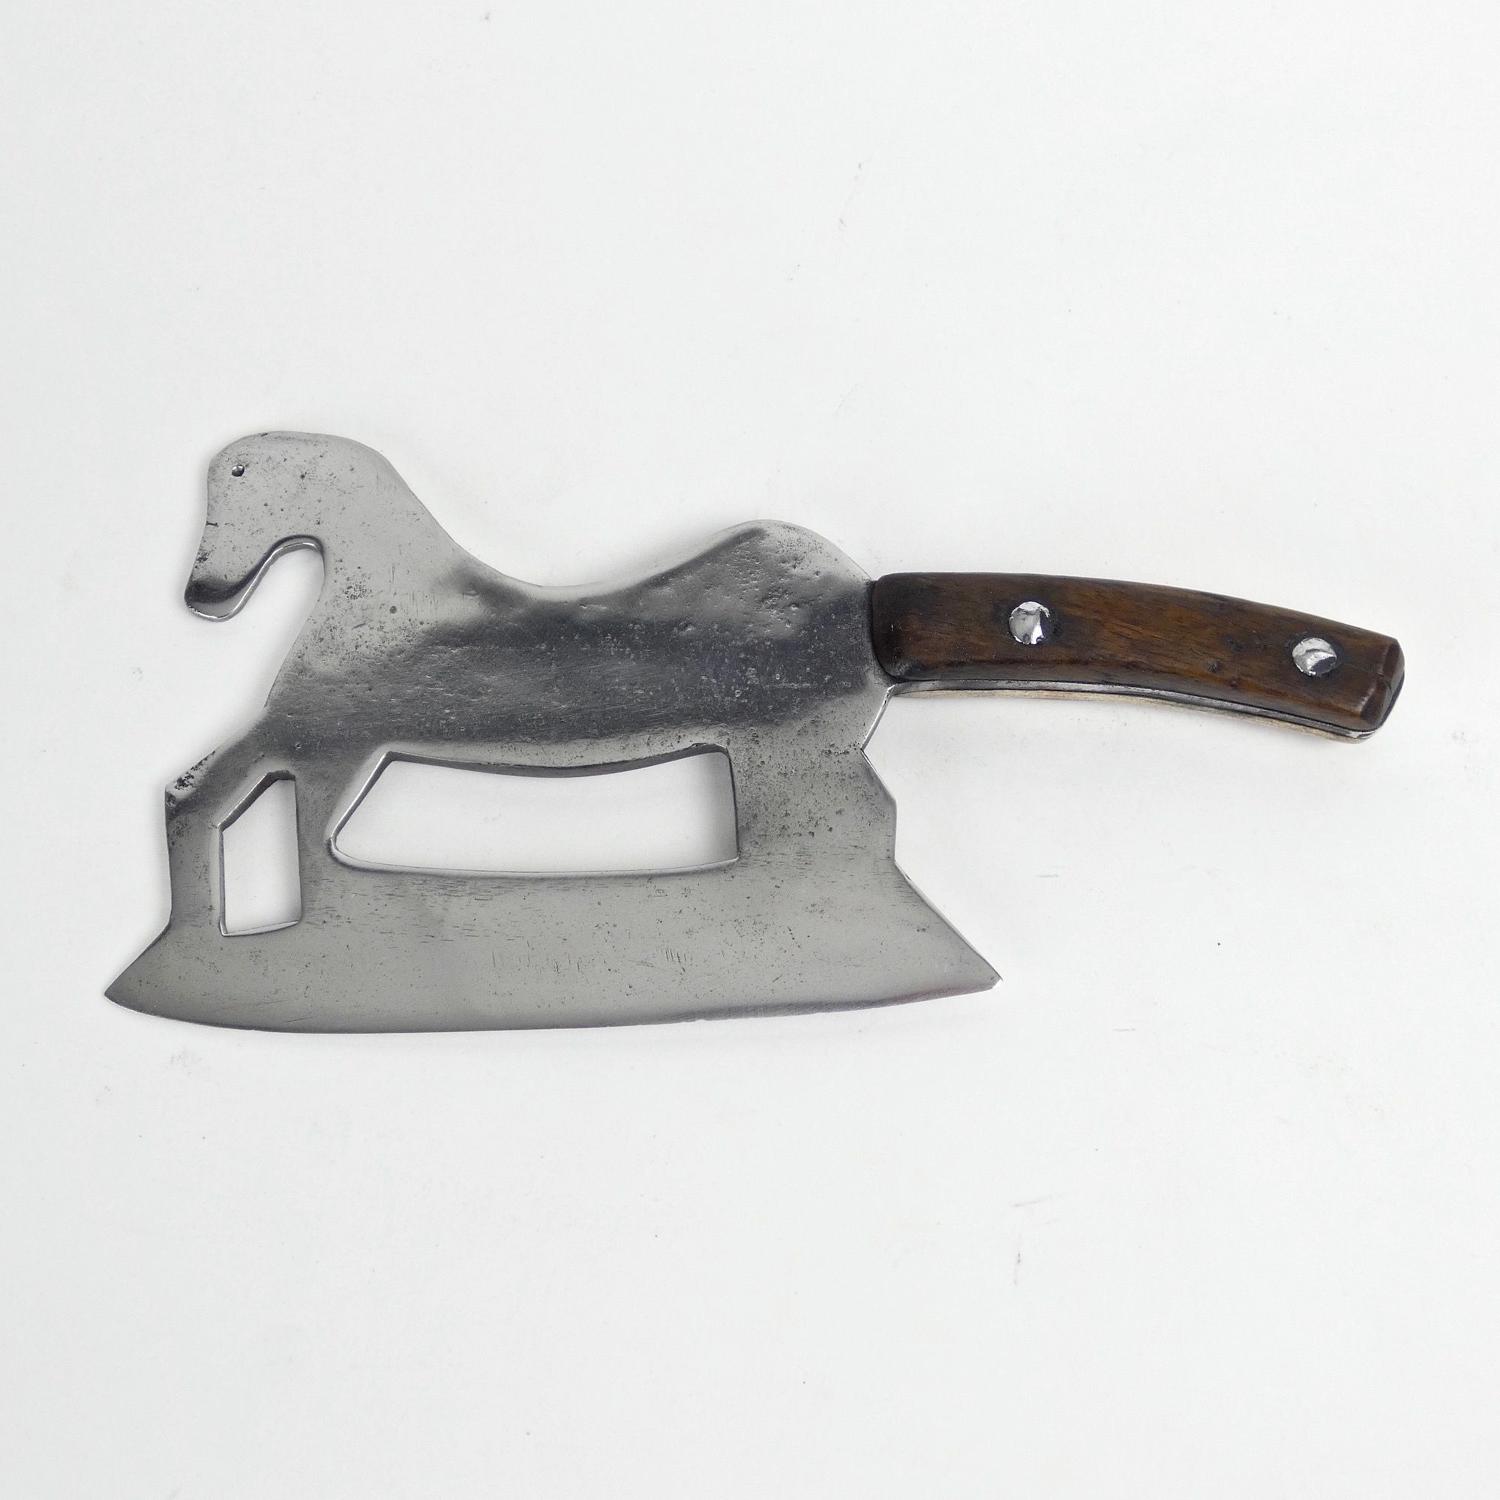 Horse shaped ice cleaver